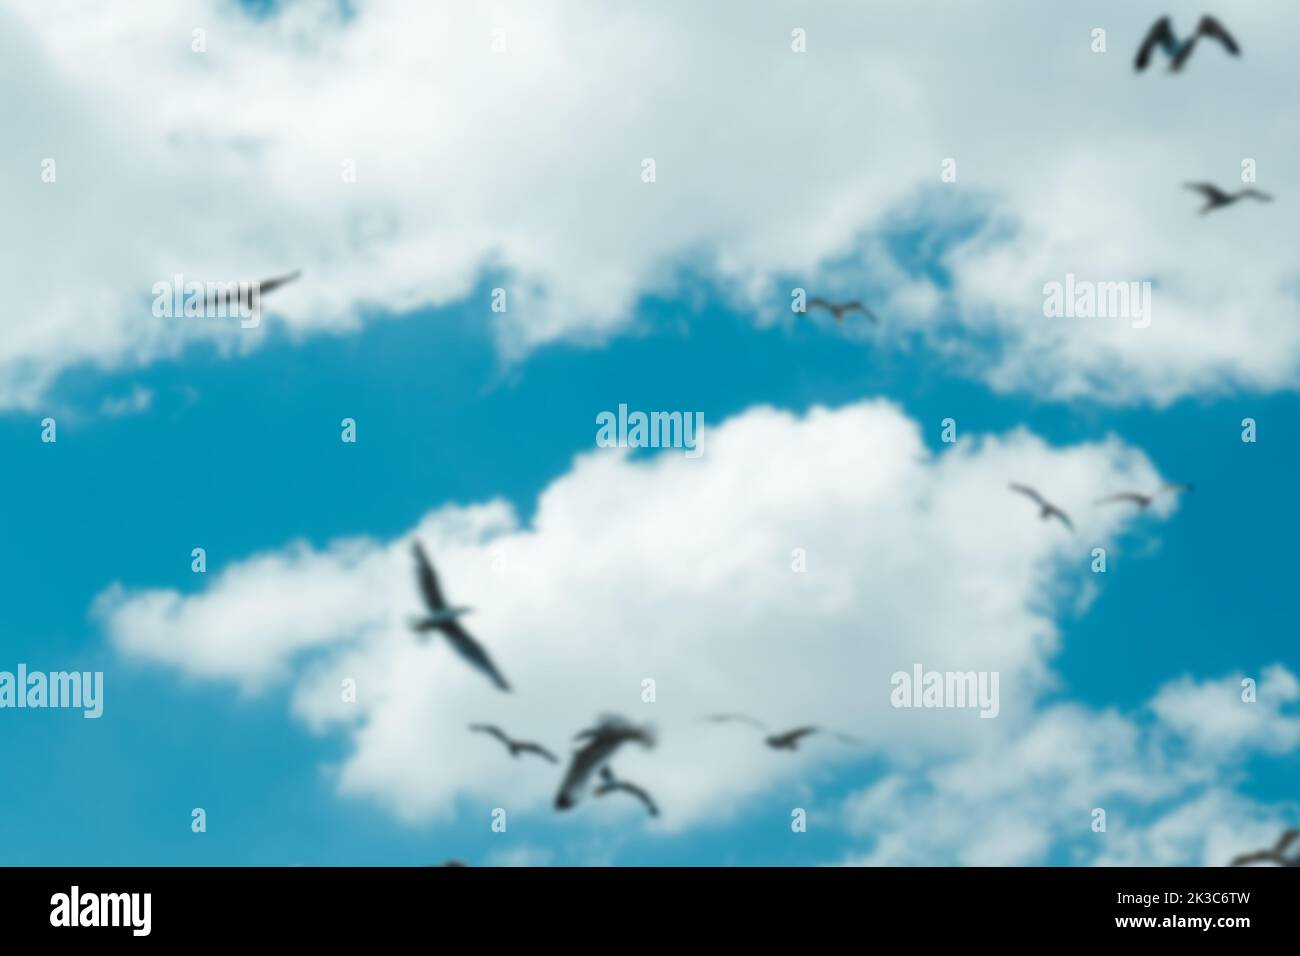 Blurred background with blue and cloudy sky and seagulls, beautiful blue landscape with birds flying around, many seagulls in air, freedom Stock Photo